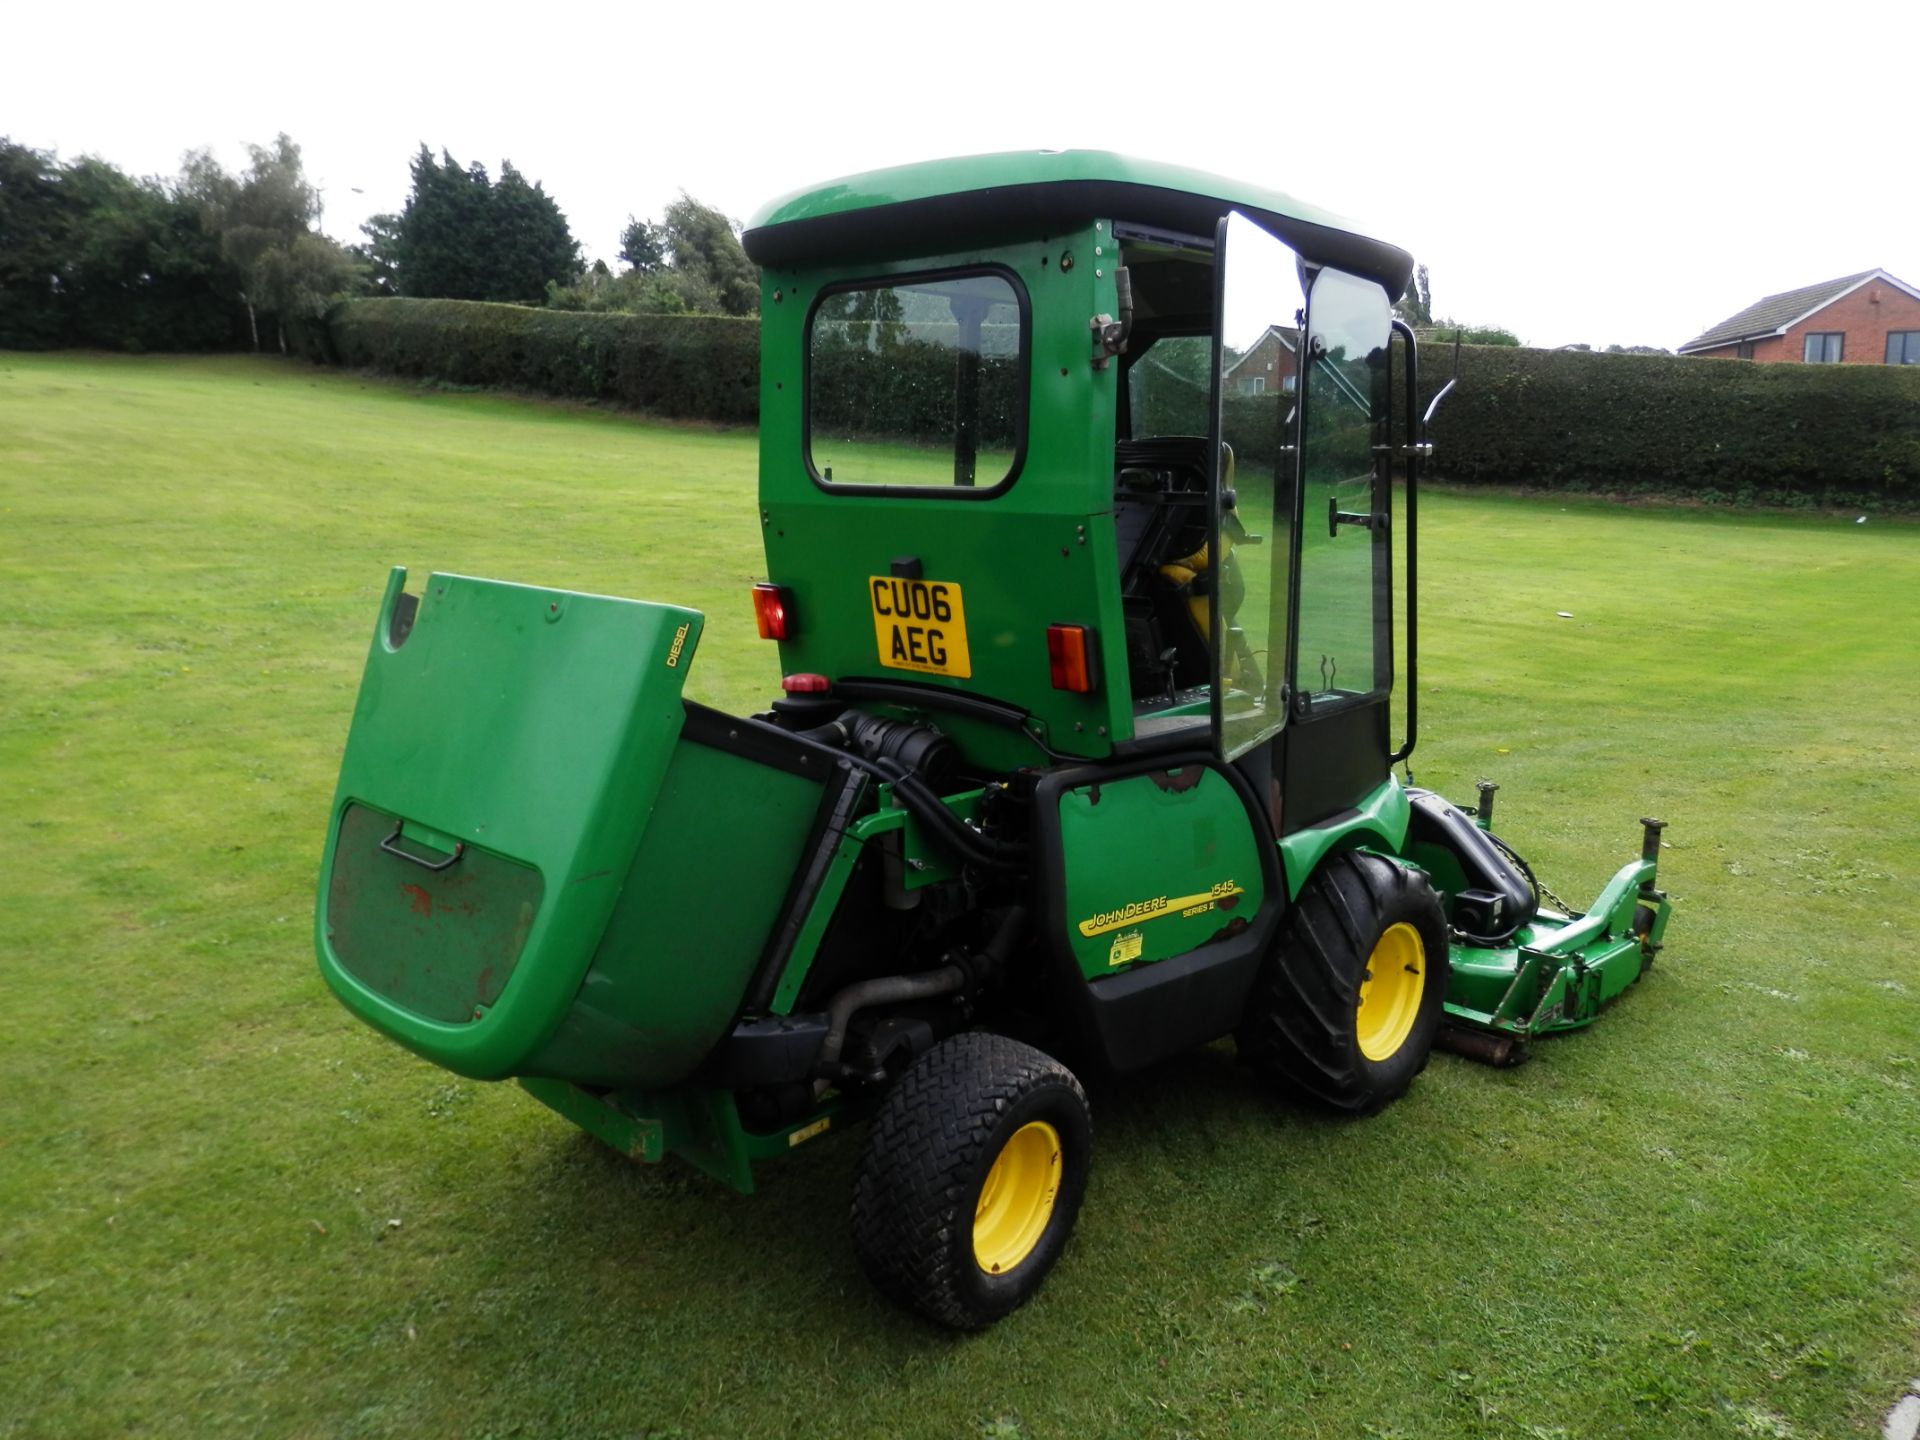 2006 JOHN DEERE 1545 SERIES 2 FRONT DECK 3 BLADE ROTARY MOWER, WIDE CUT AREA FOR LARGE ESTATES. - Image 6 of 15